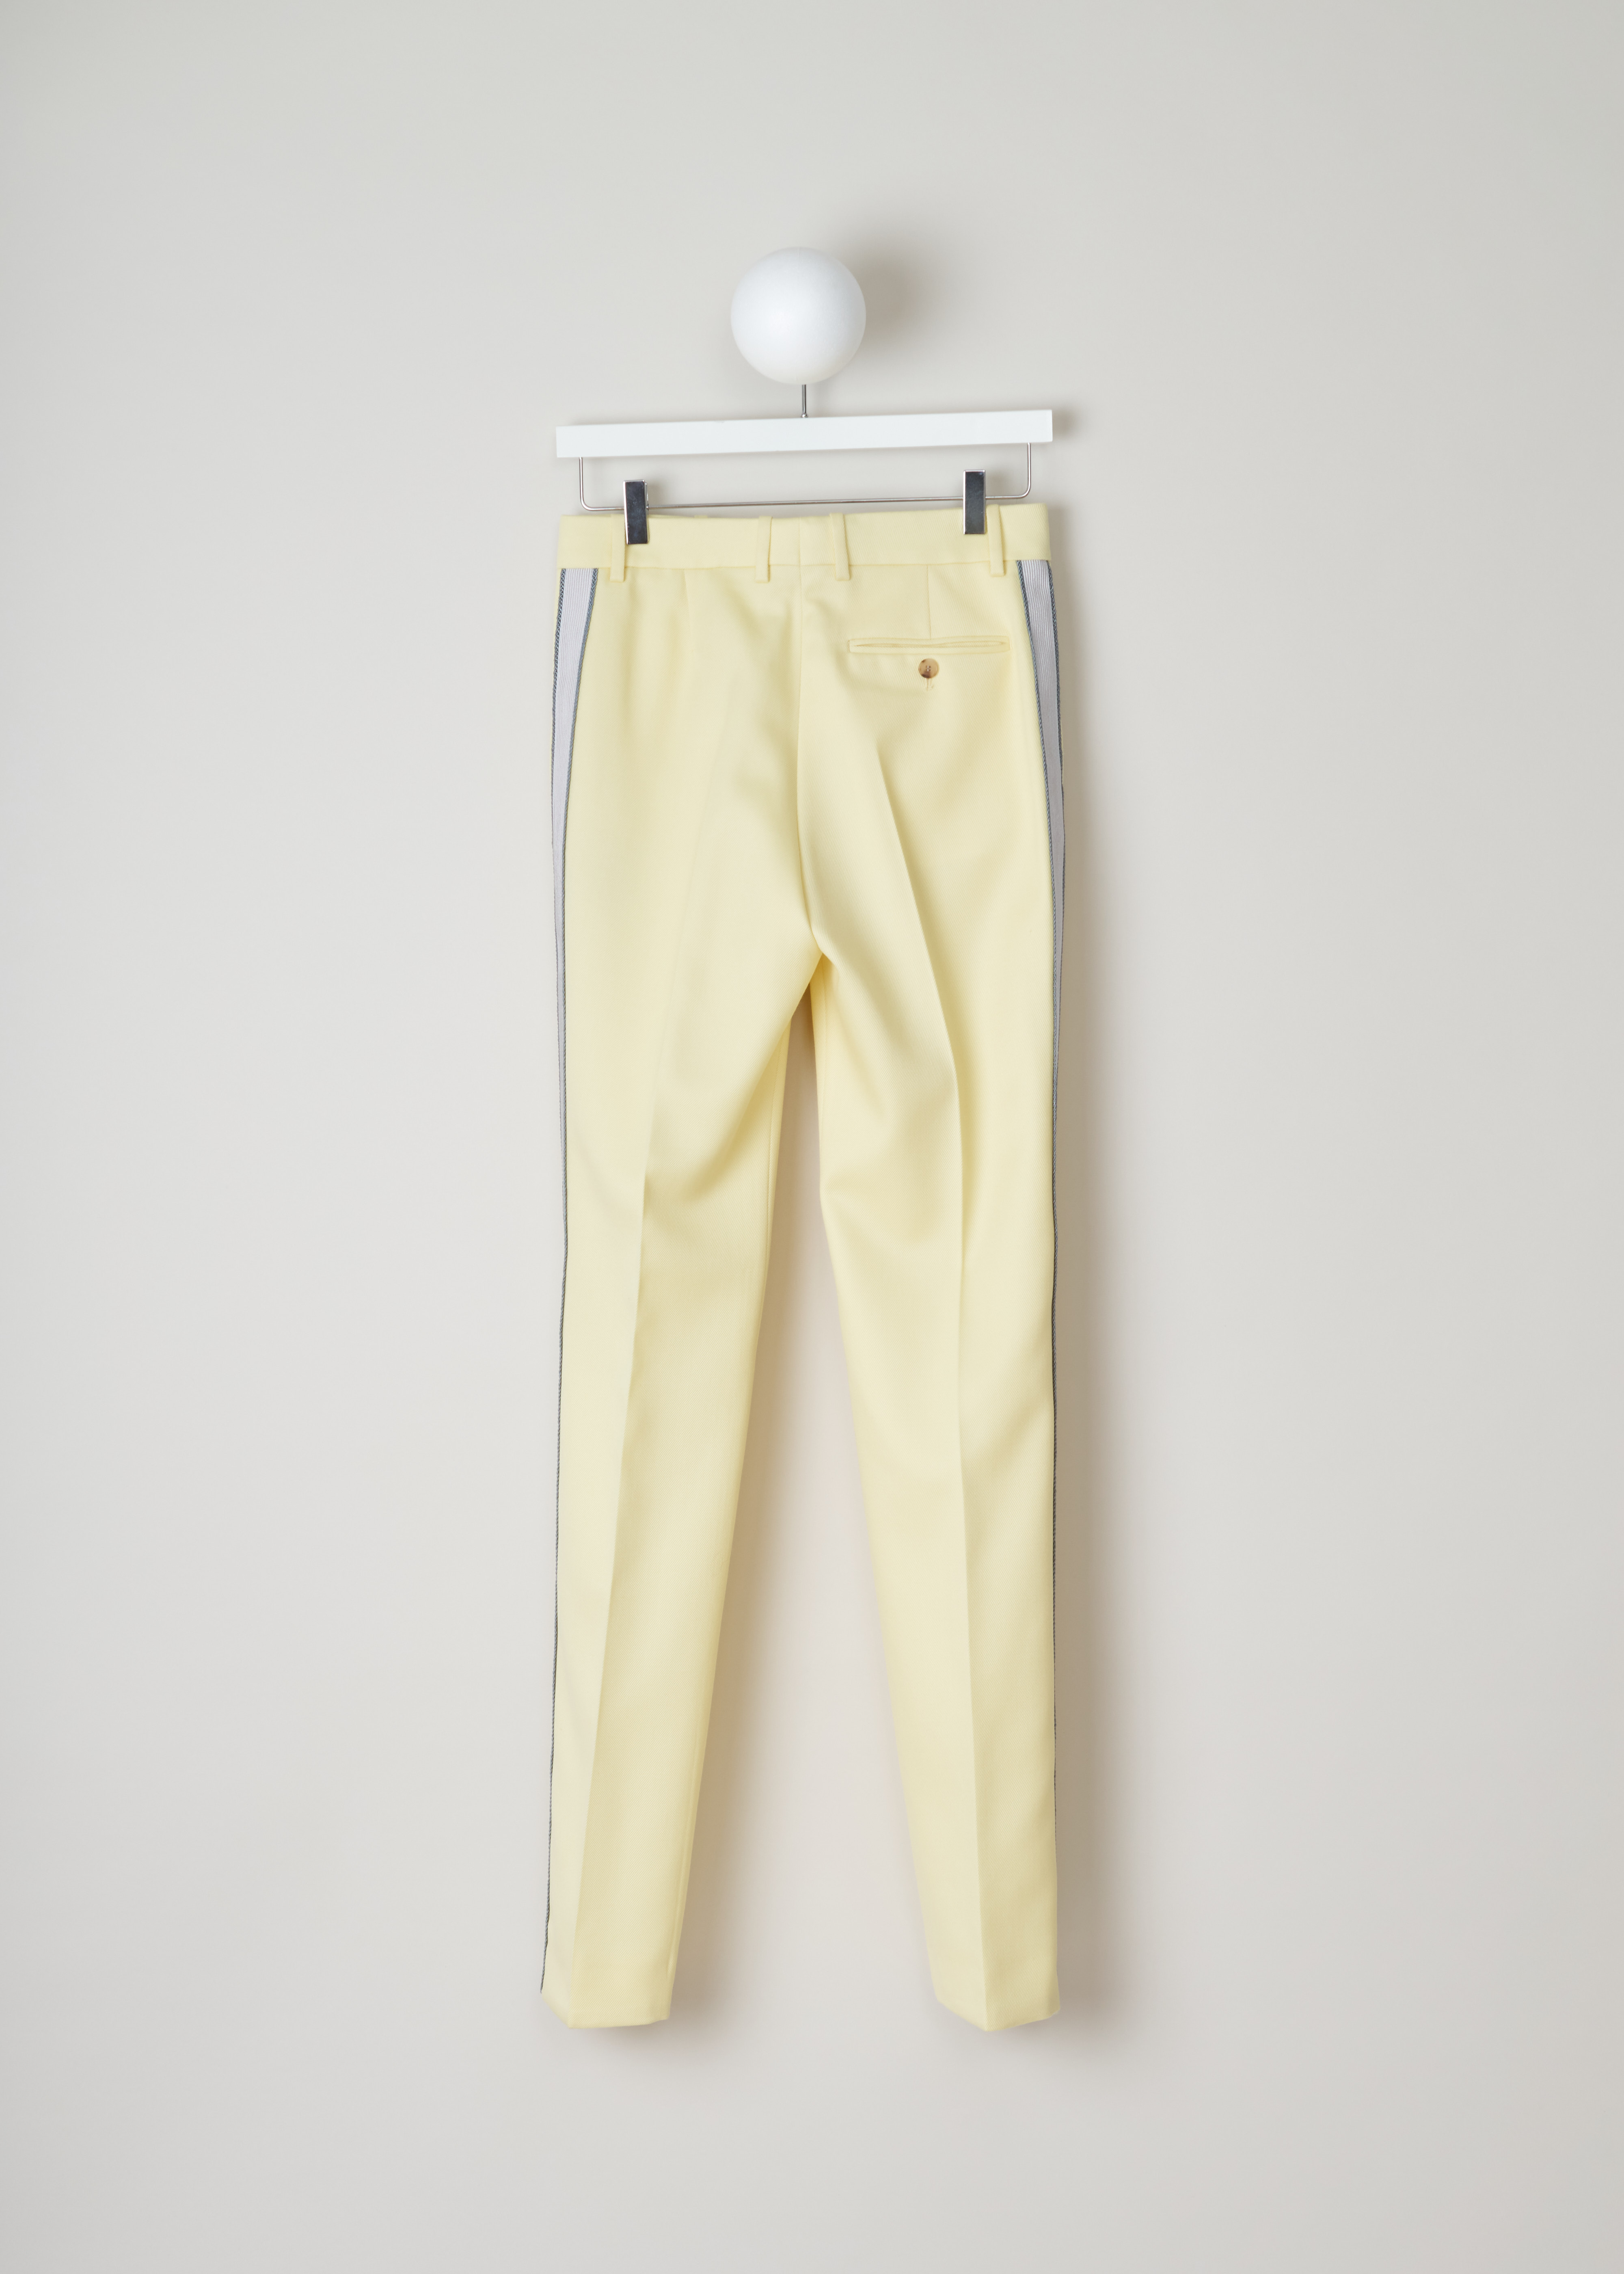 Calvin Klein 205W39NYC Yellow pants with ribbon trim 84WWPB22_W037_764 light yellow pearl back. Yellow trousers with side piping in white and blue, centre creases, side pockets and a welt pocket on the back.